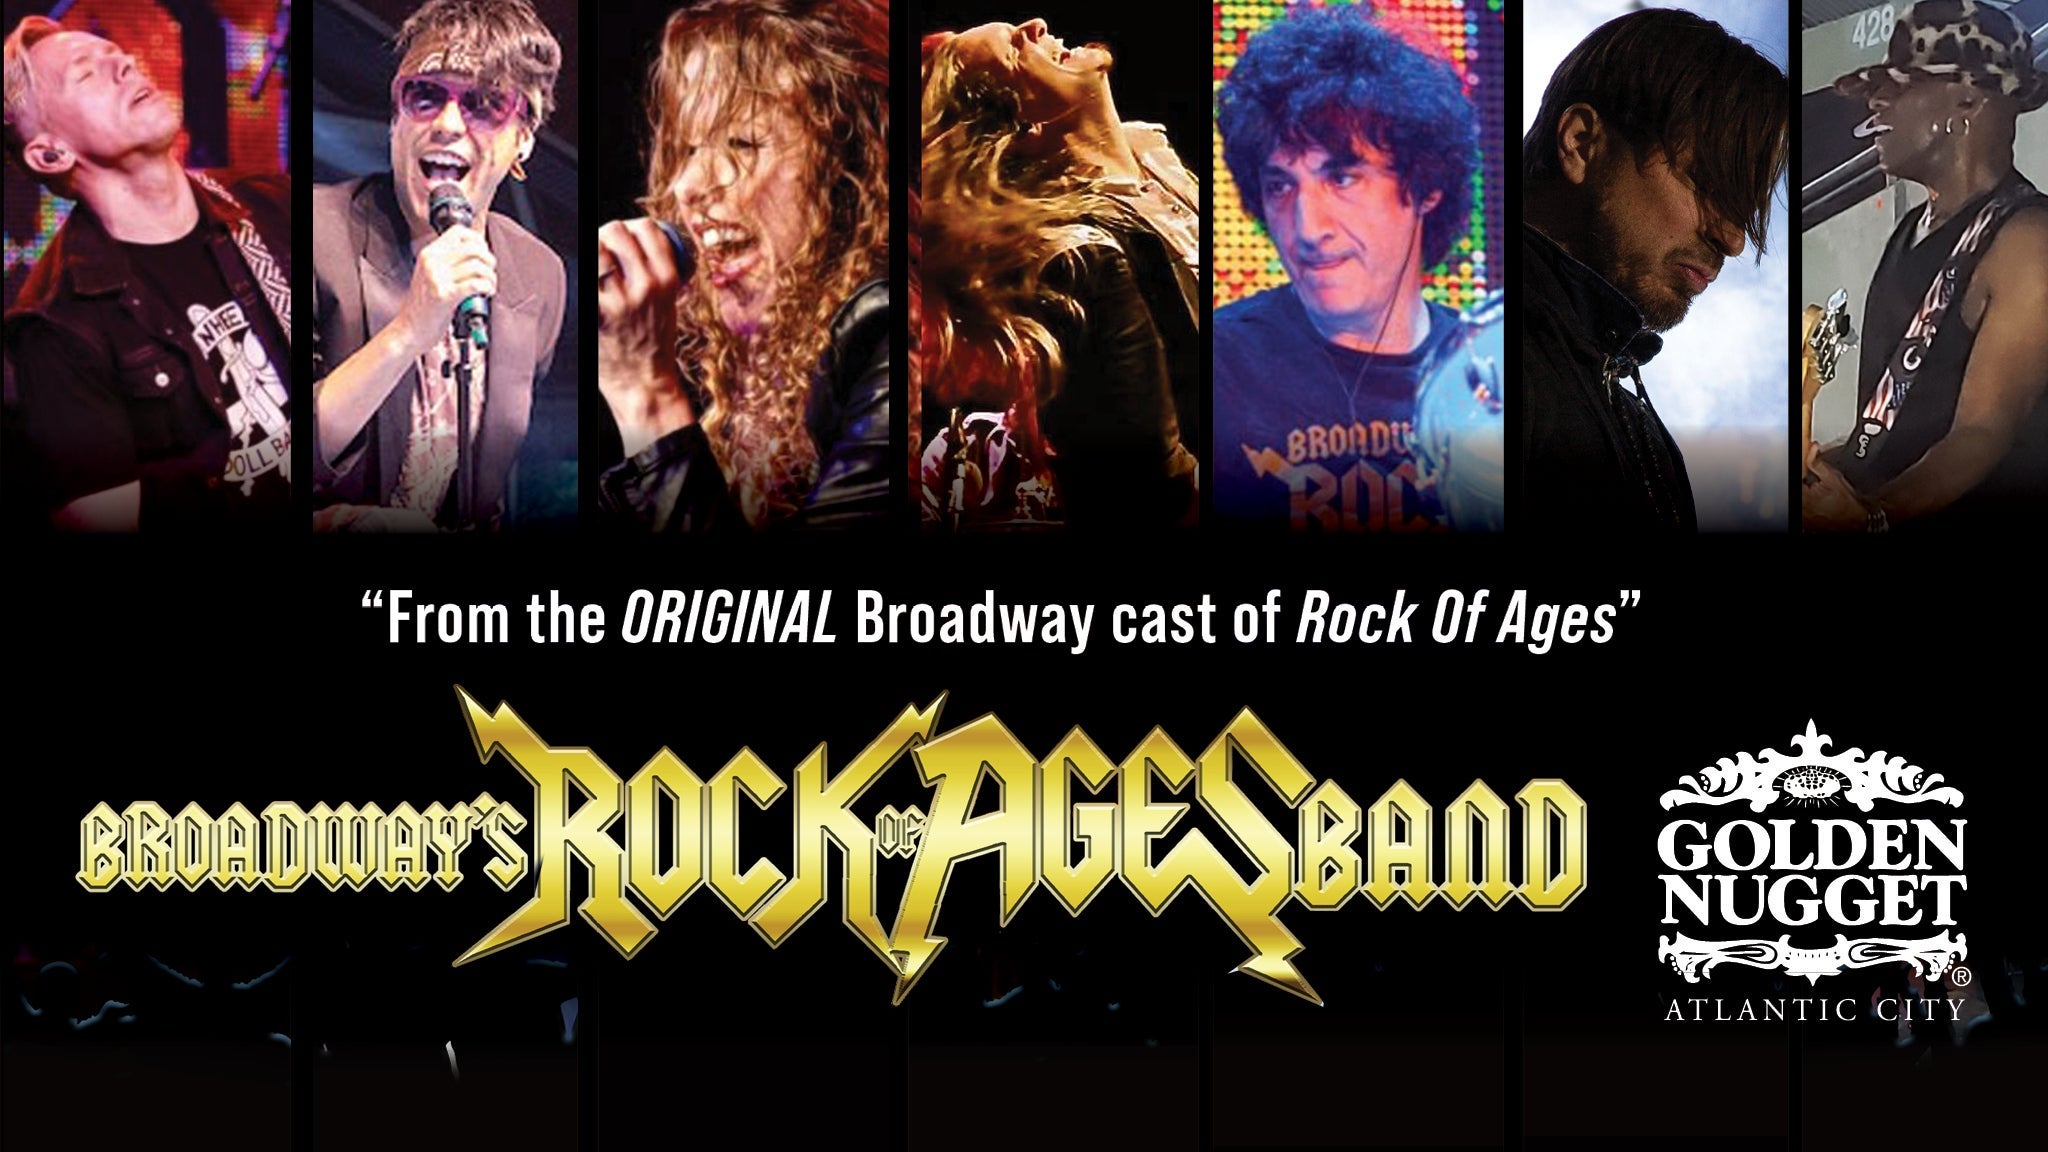 Rock of Ages Band in Atlantic City promo photo for Internet presale offer code